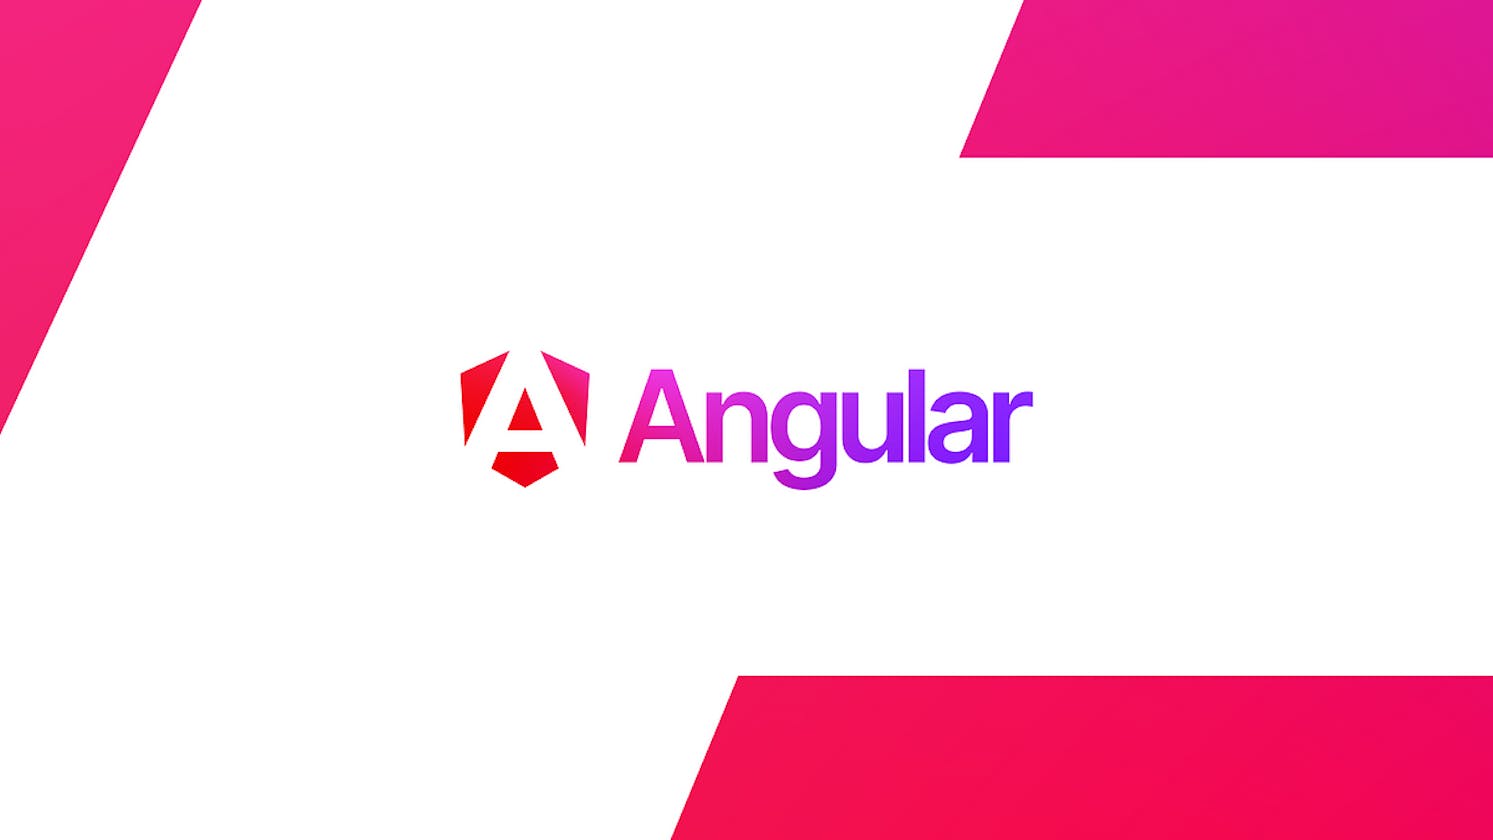 Multiple layouts in Angular